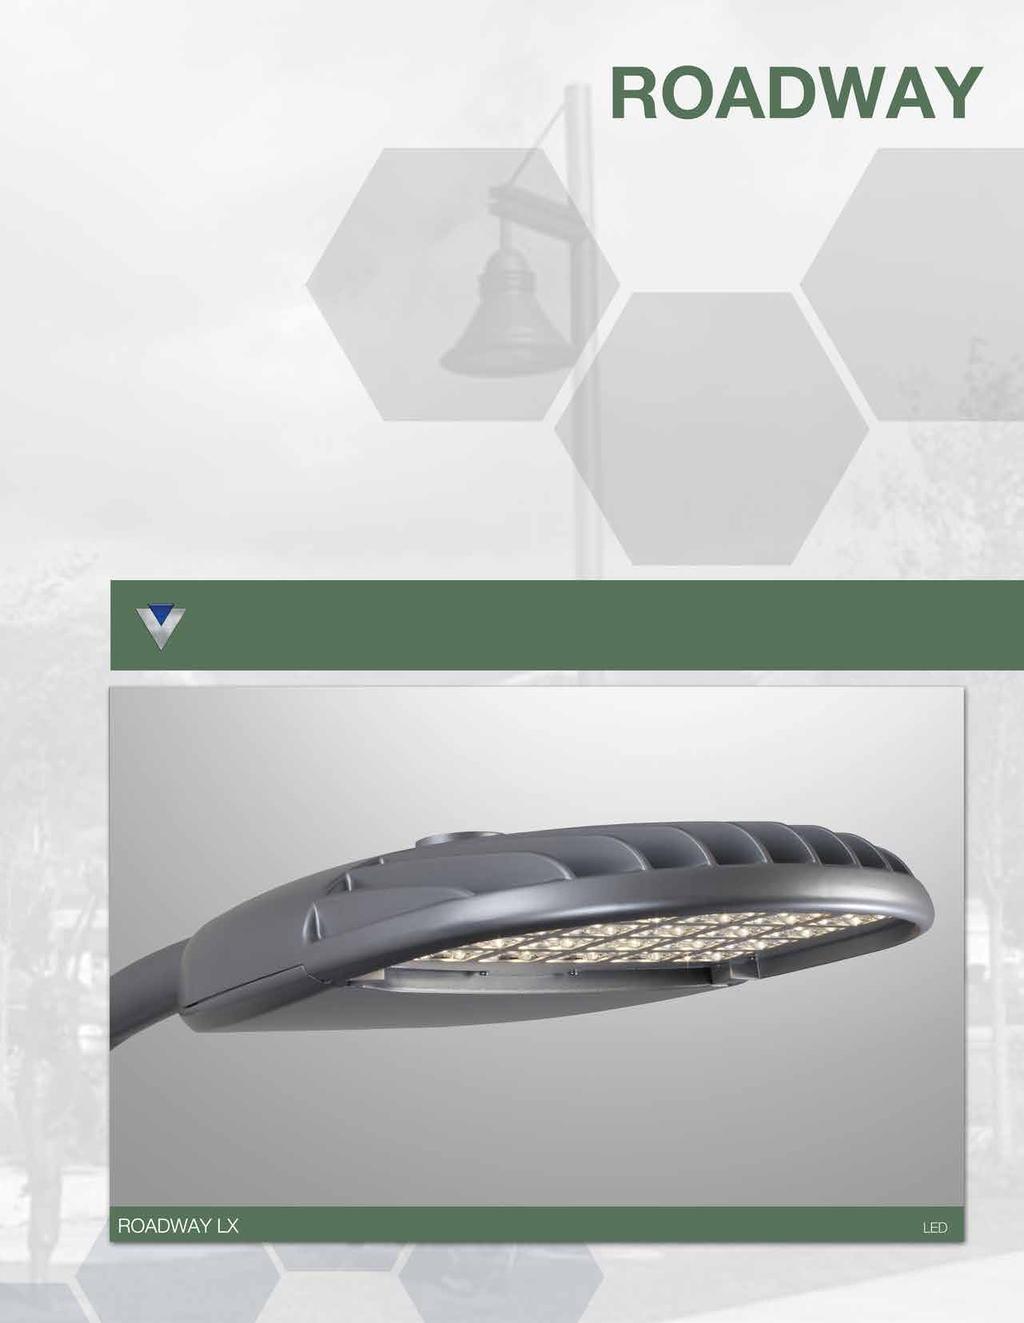 Roadway : The Evolution Of Design And Efficiency The evolution of LED roadway lighting really brings our Roadway lighting products into the 21st Century with an exciting array of options for cities